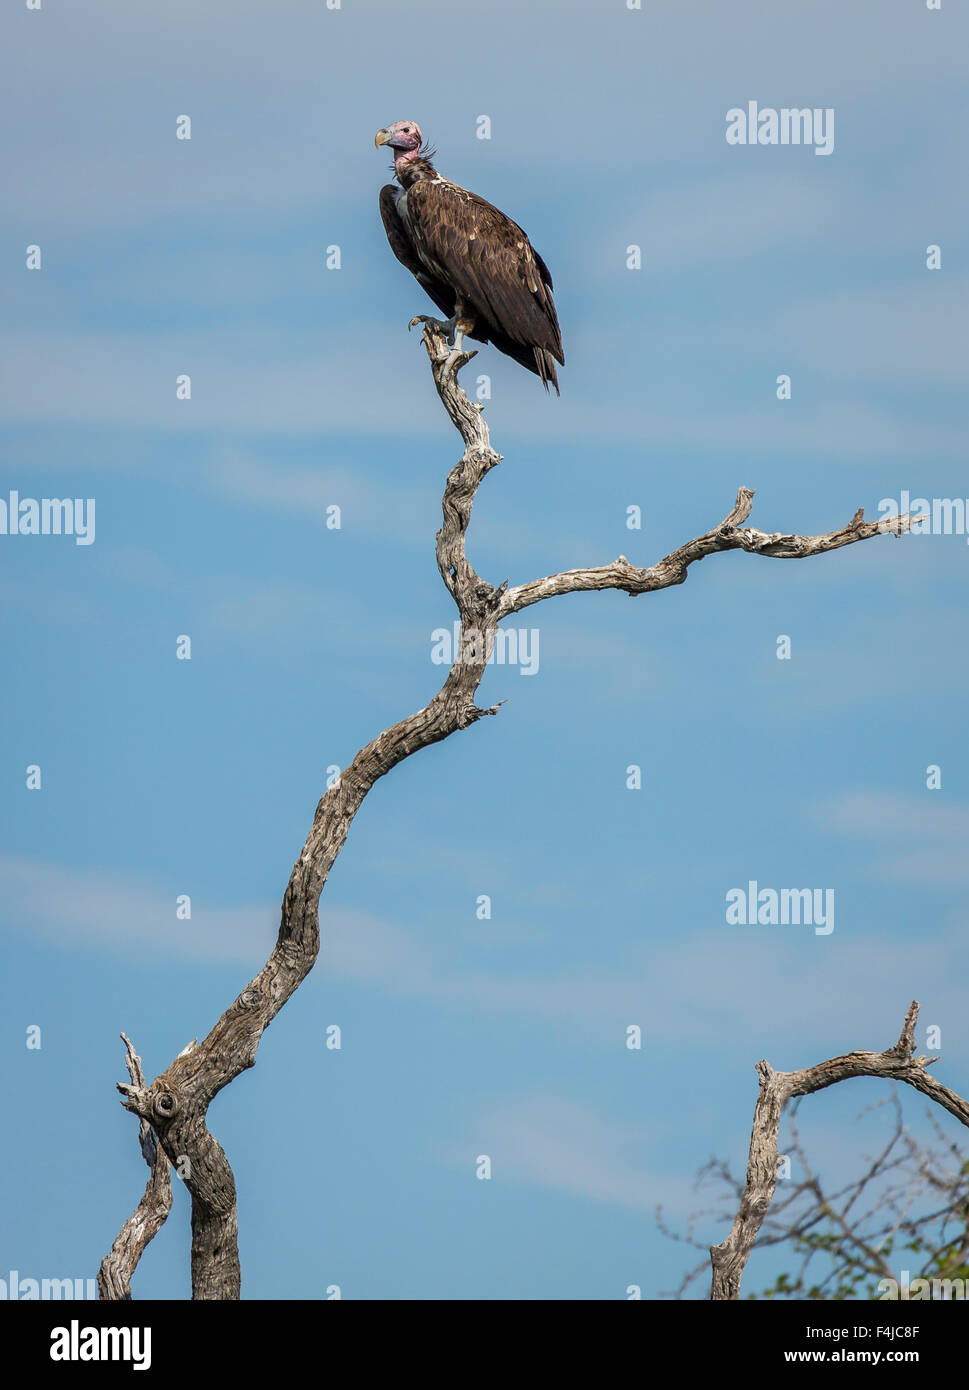 Vulture perched on a tree branch, Etosha National Park, Namibia, Africa Stock Photo